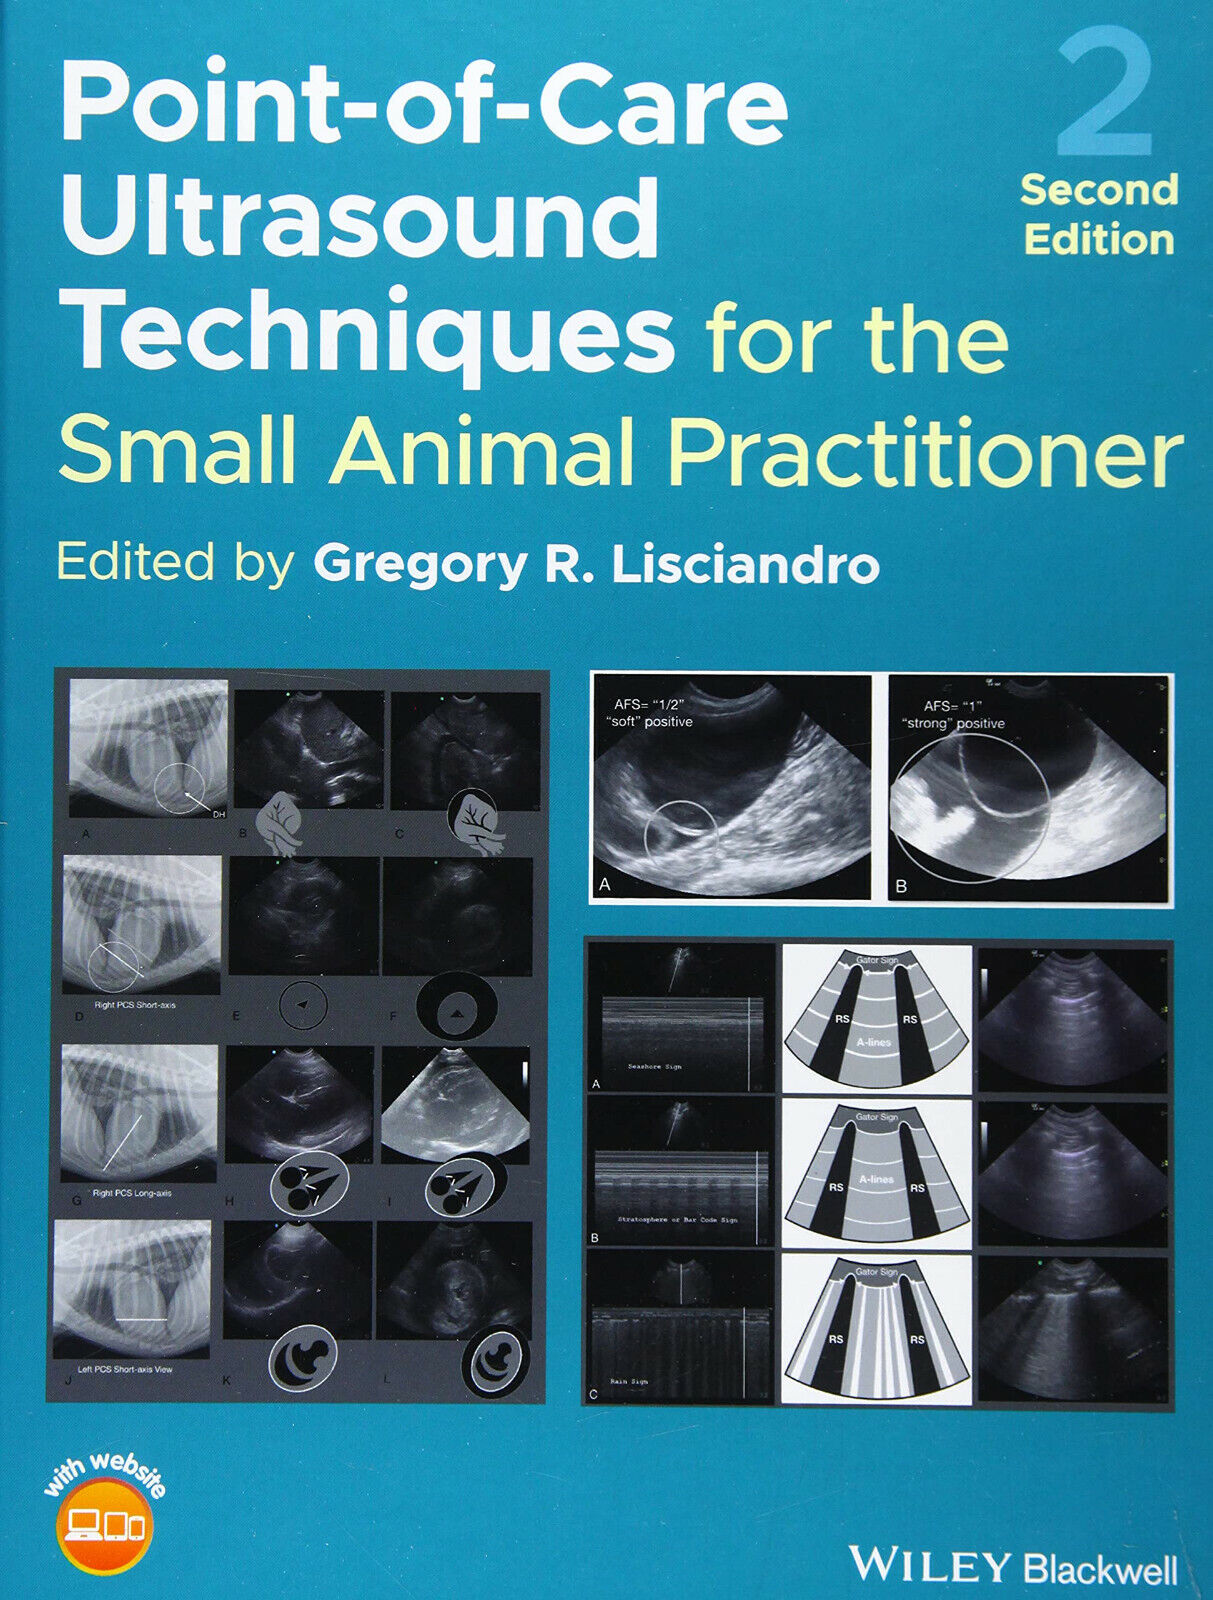 Point-of-Care Ultrasound Techniques for the Small Animal Practitioner - 2020